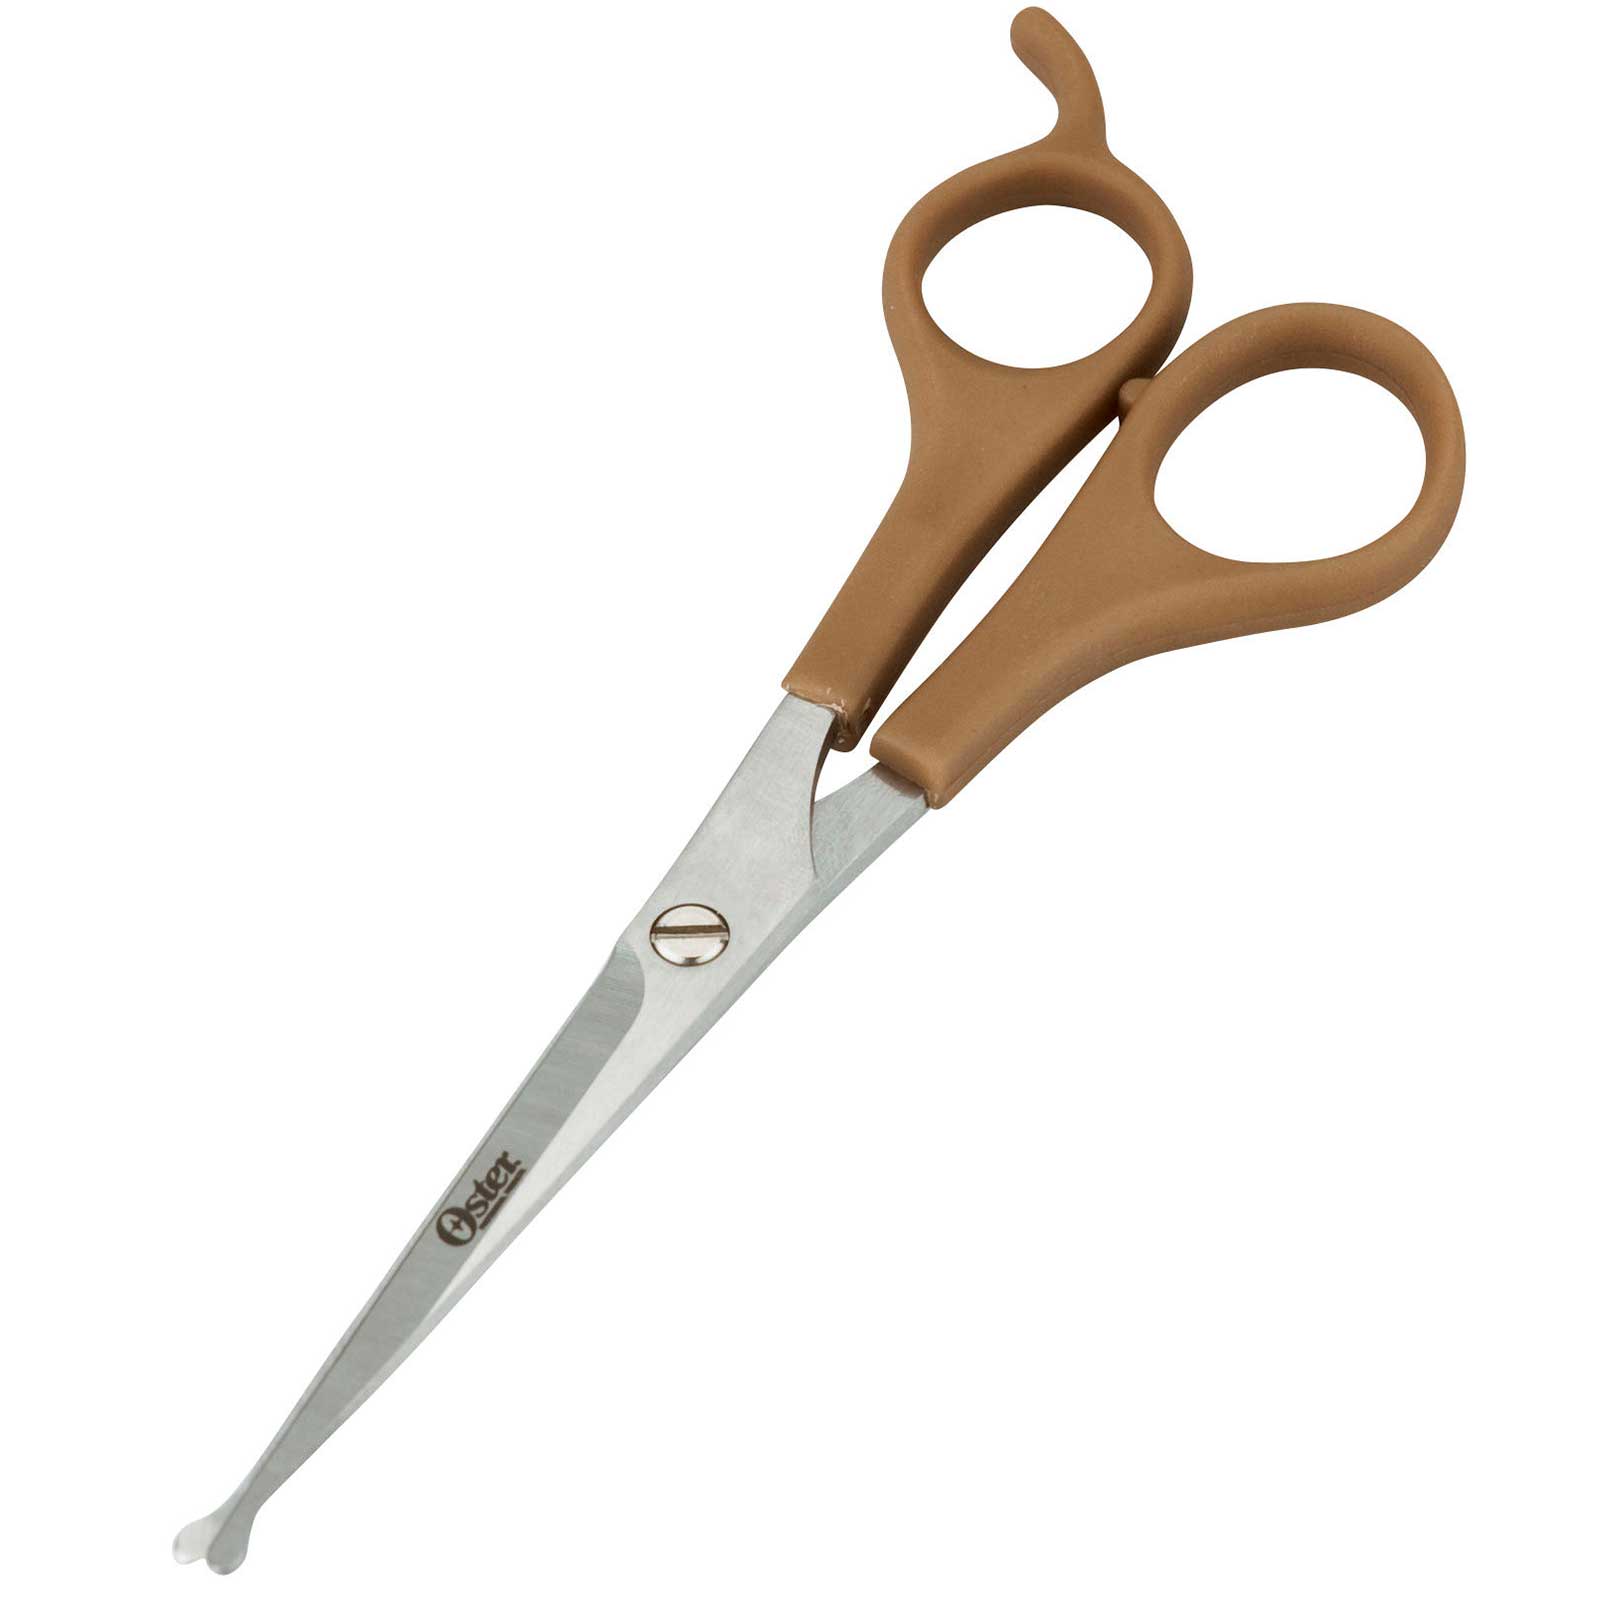 Oster Grooming Shears with rounded safety tips